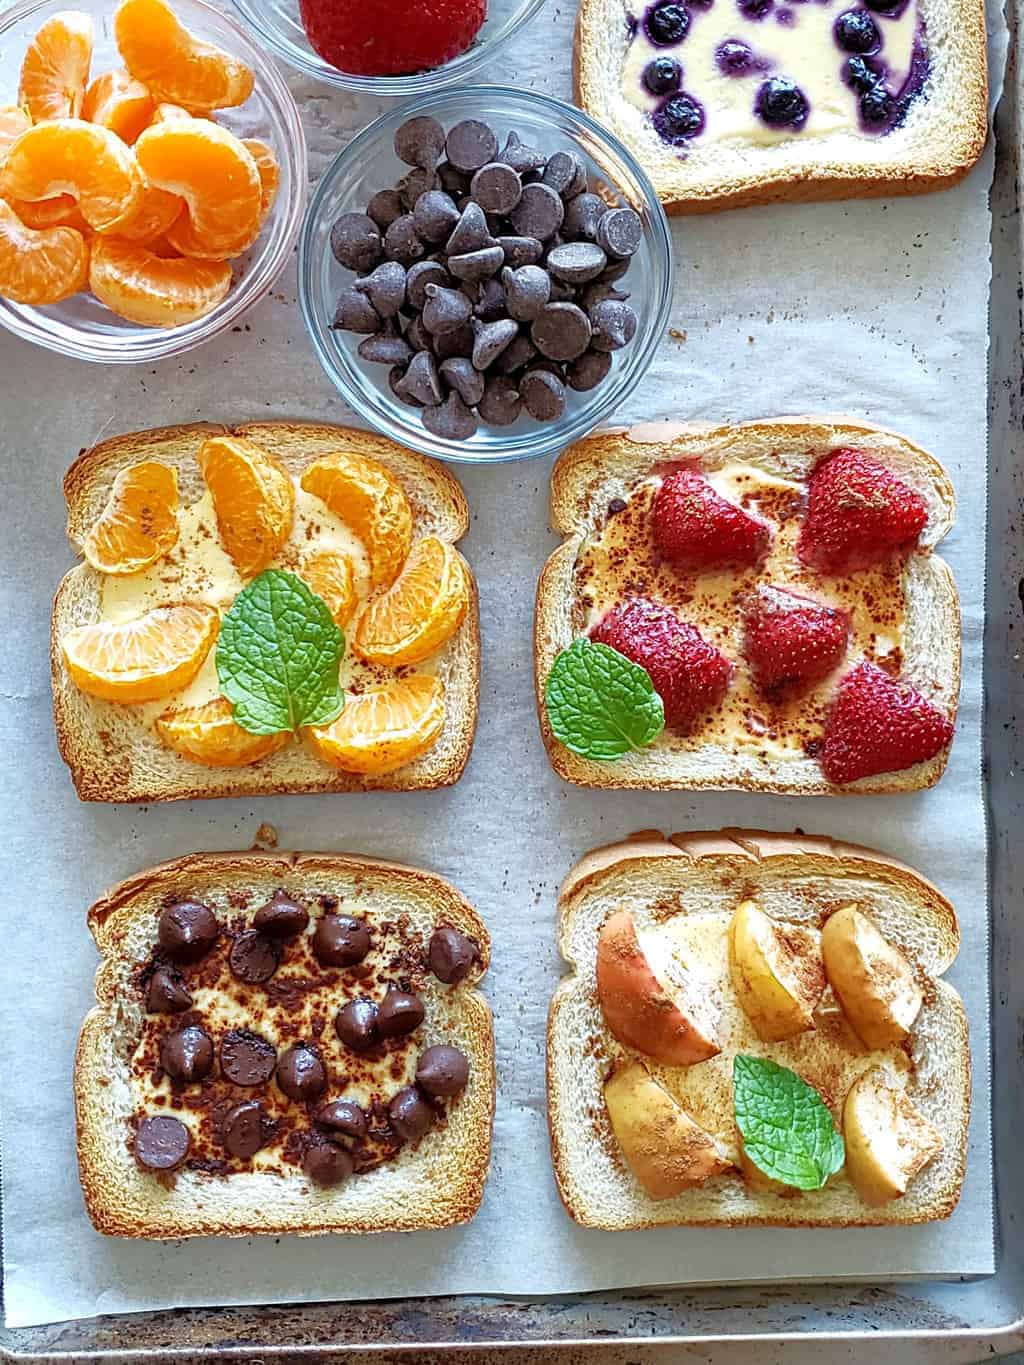 Overhead view of several yogurt toasts made with different fruits on top.